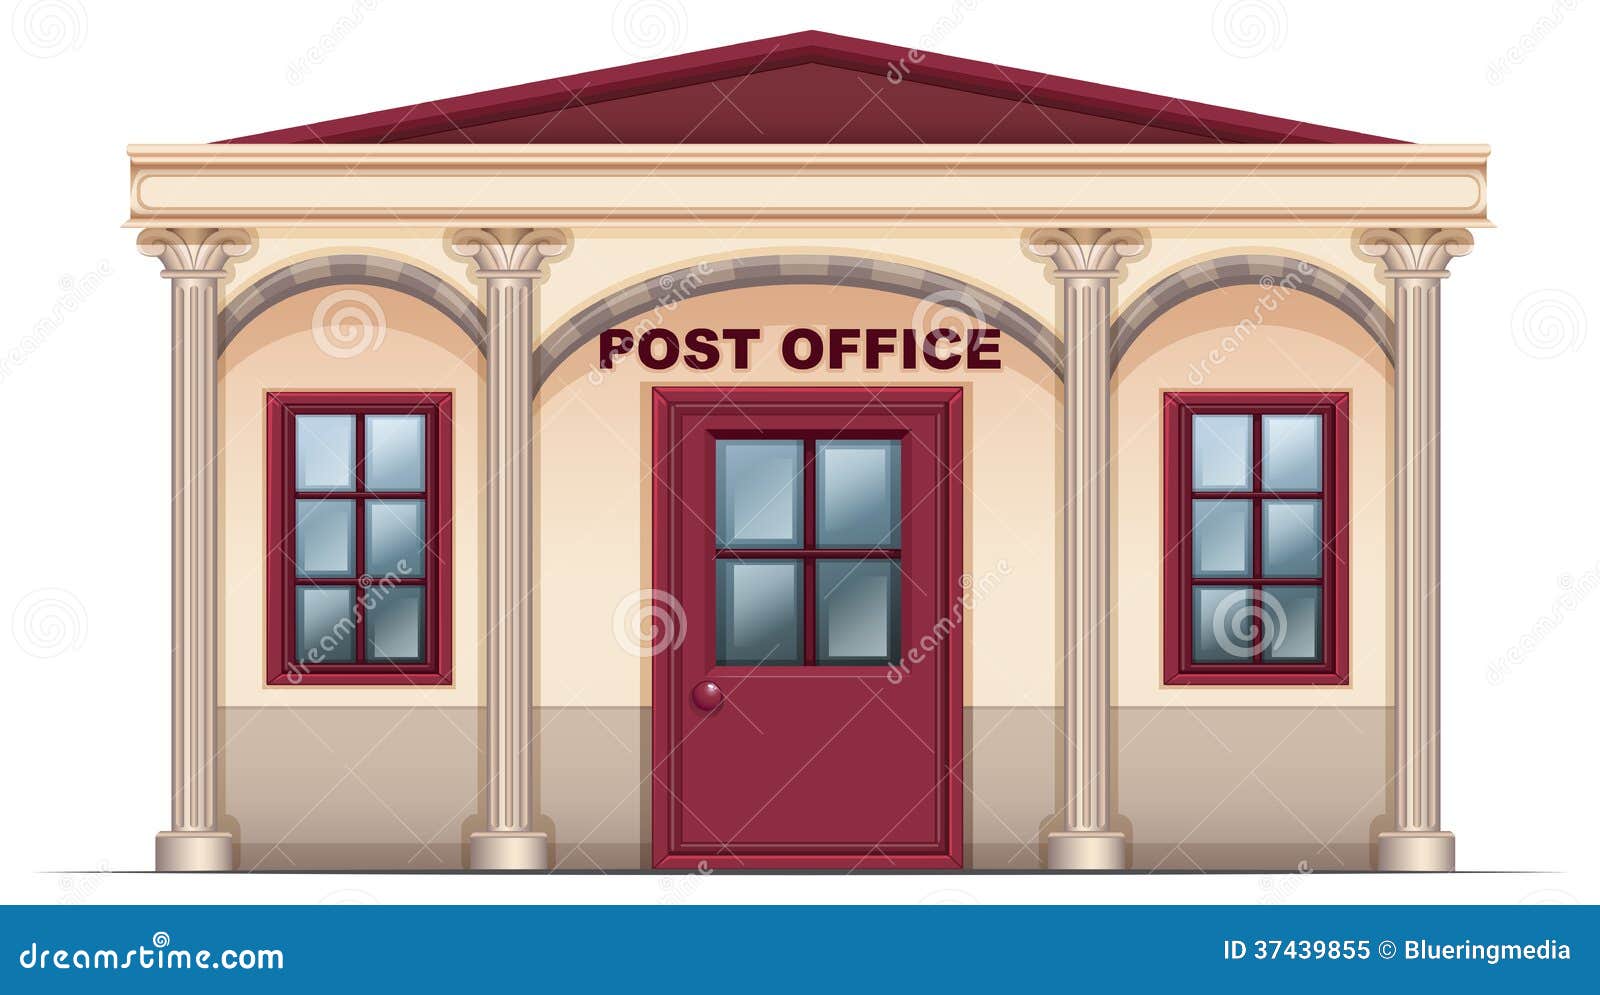 clipart post office building - photo #14